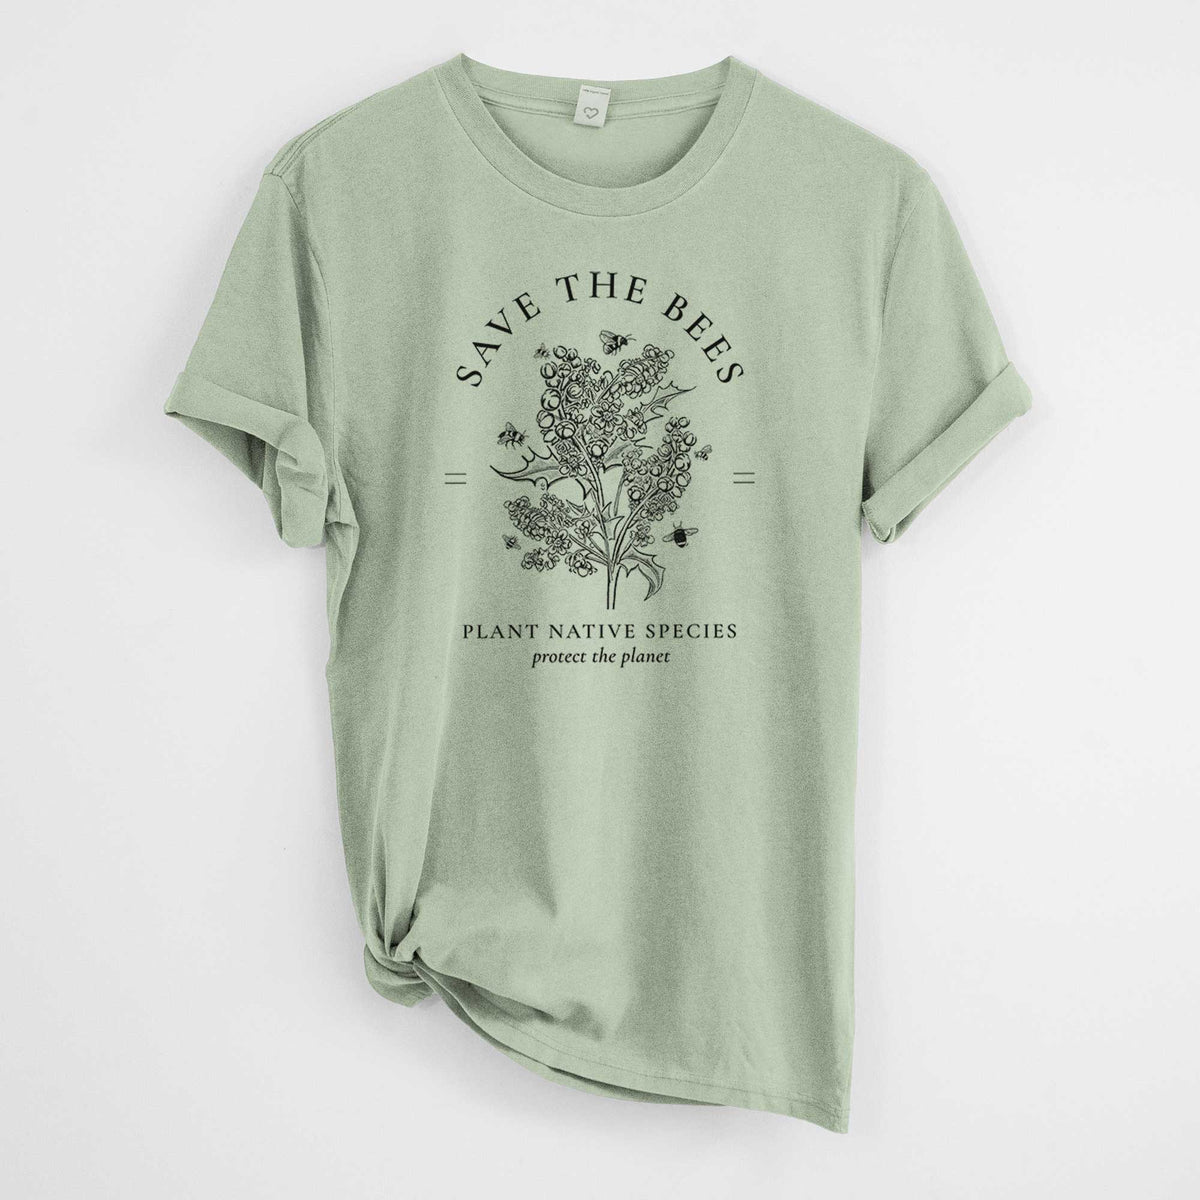 Save the Bees - Plant Native Species -  Mineral Wash 100% Organic Cotton Short Sleeve